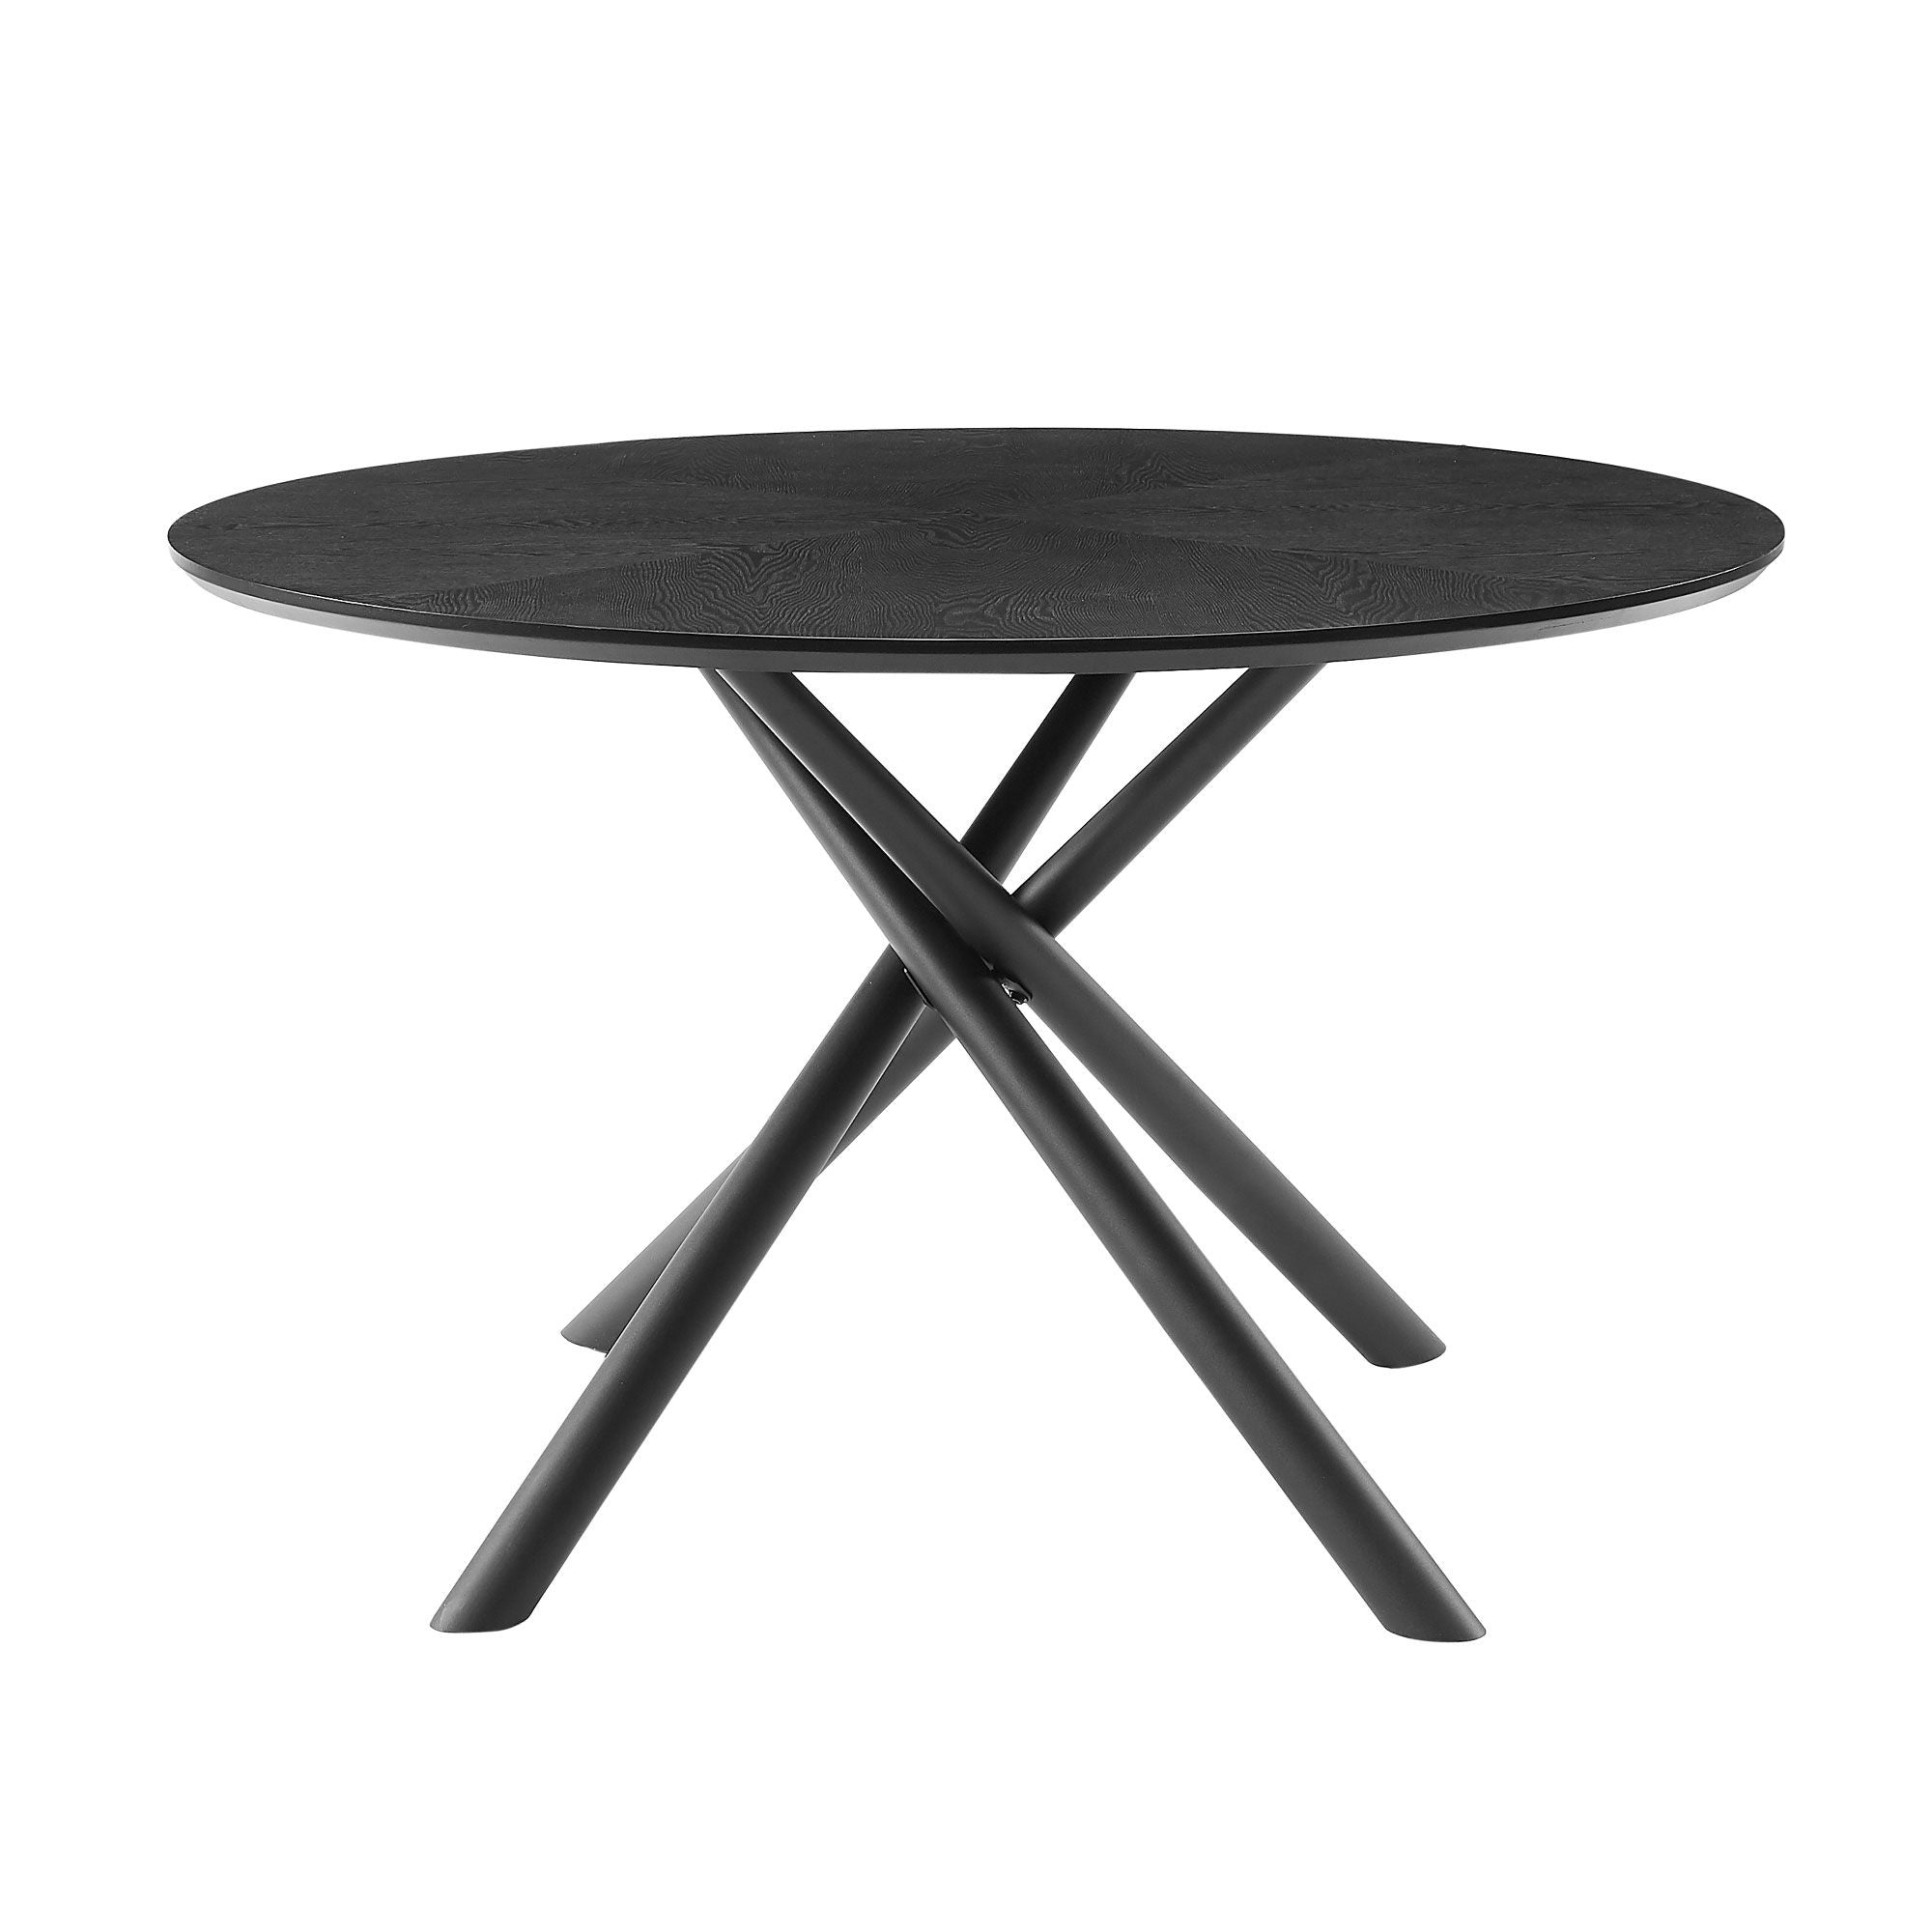 53.14" Round MDF Coffee Table End Table Short Leisure Tea Table Cross Legs Metal Base, Easy To Assemble, Black